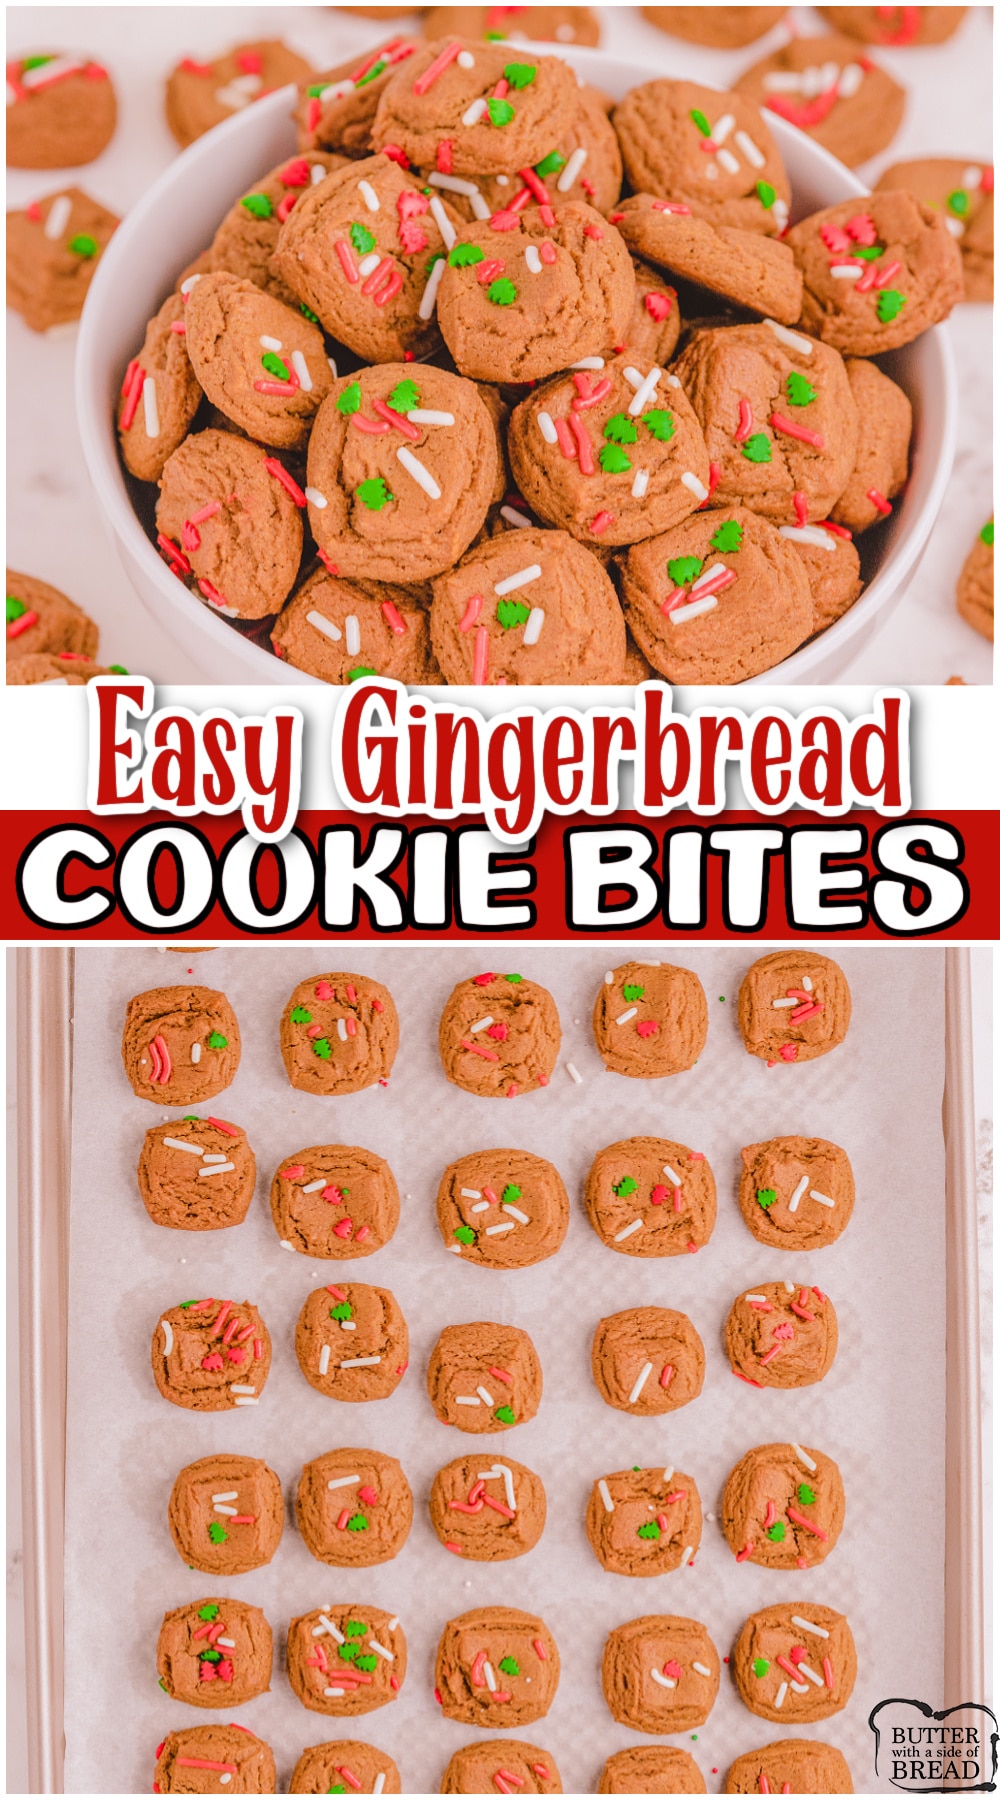 Gingerbread Cookie Bites are the simplest gingerbread recipe ever! Chewy, bite-sized gingerbread cookies that take a fraction of the time to make & perfect for holiday parties!